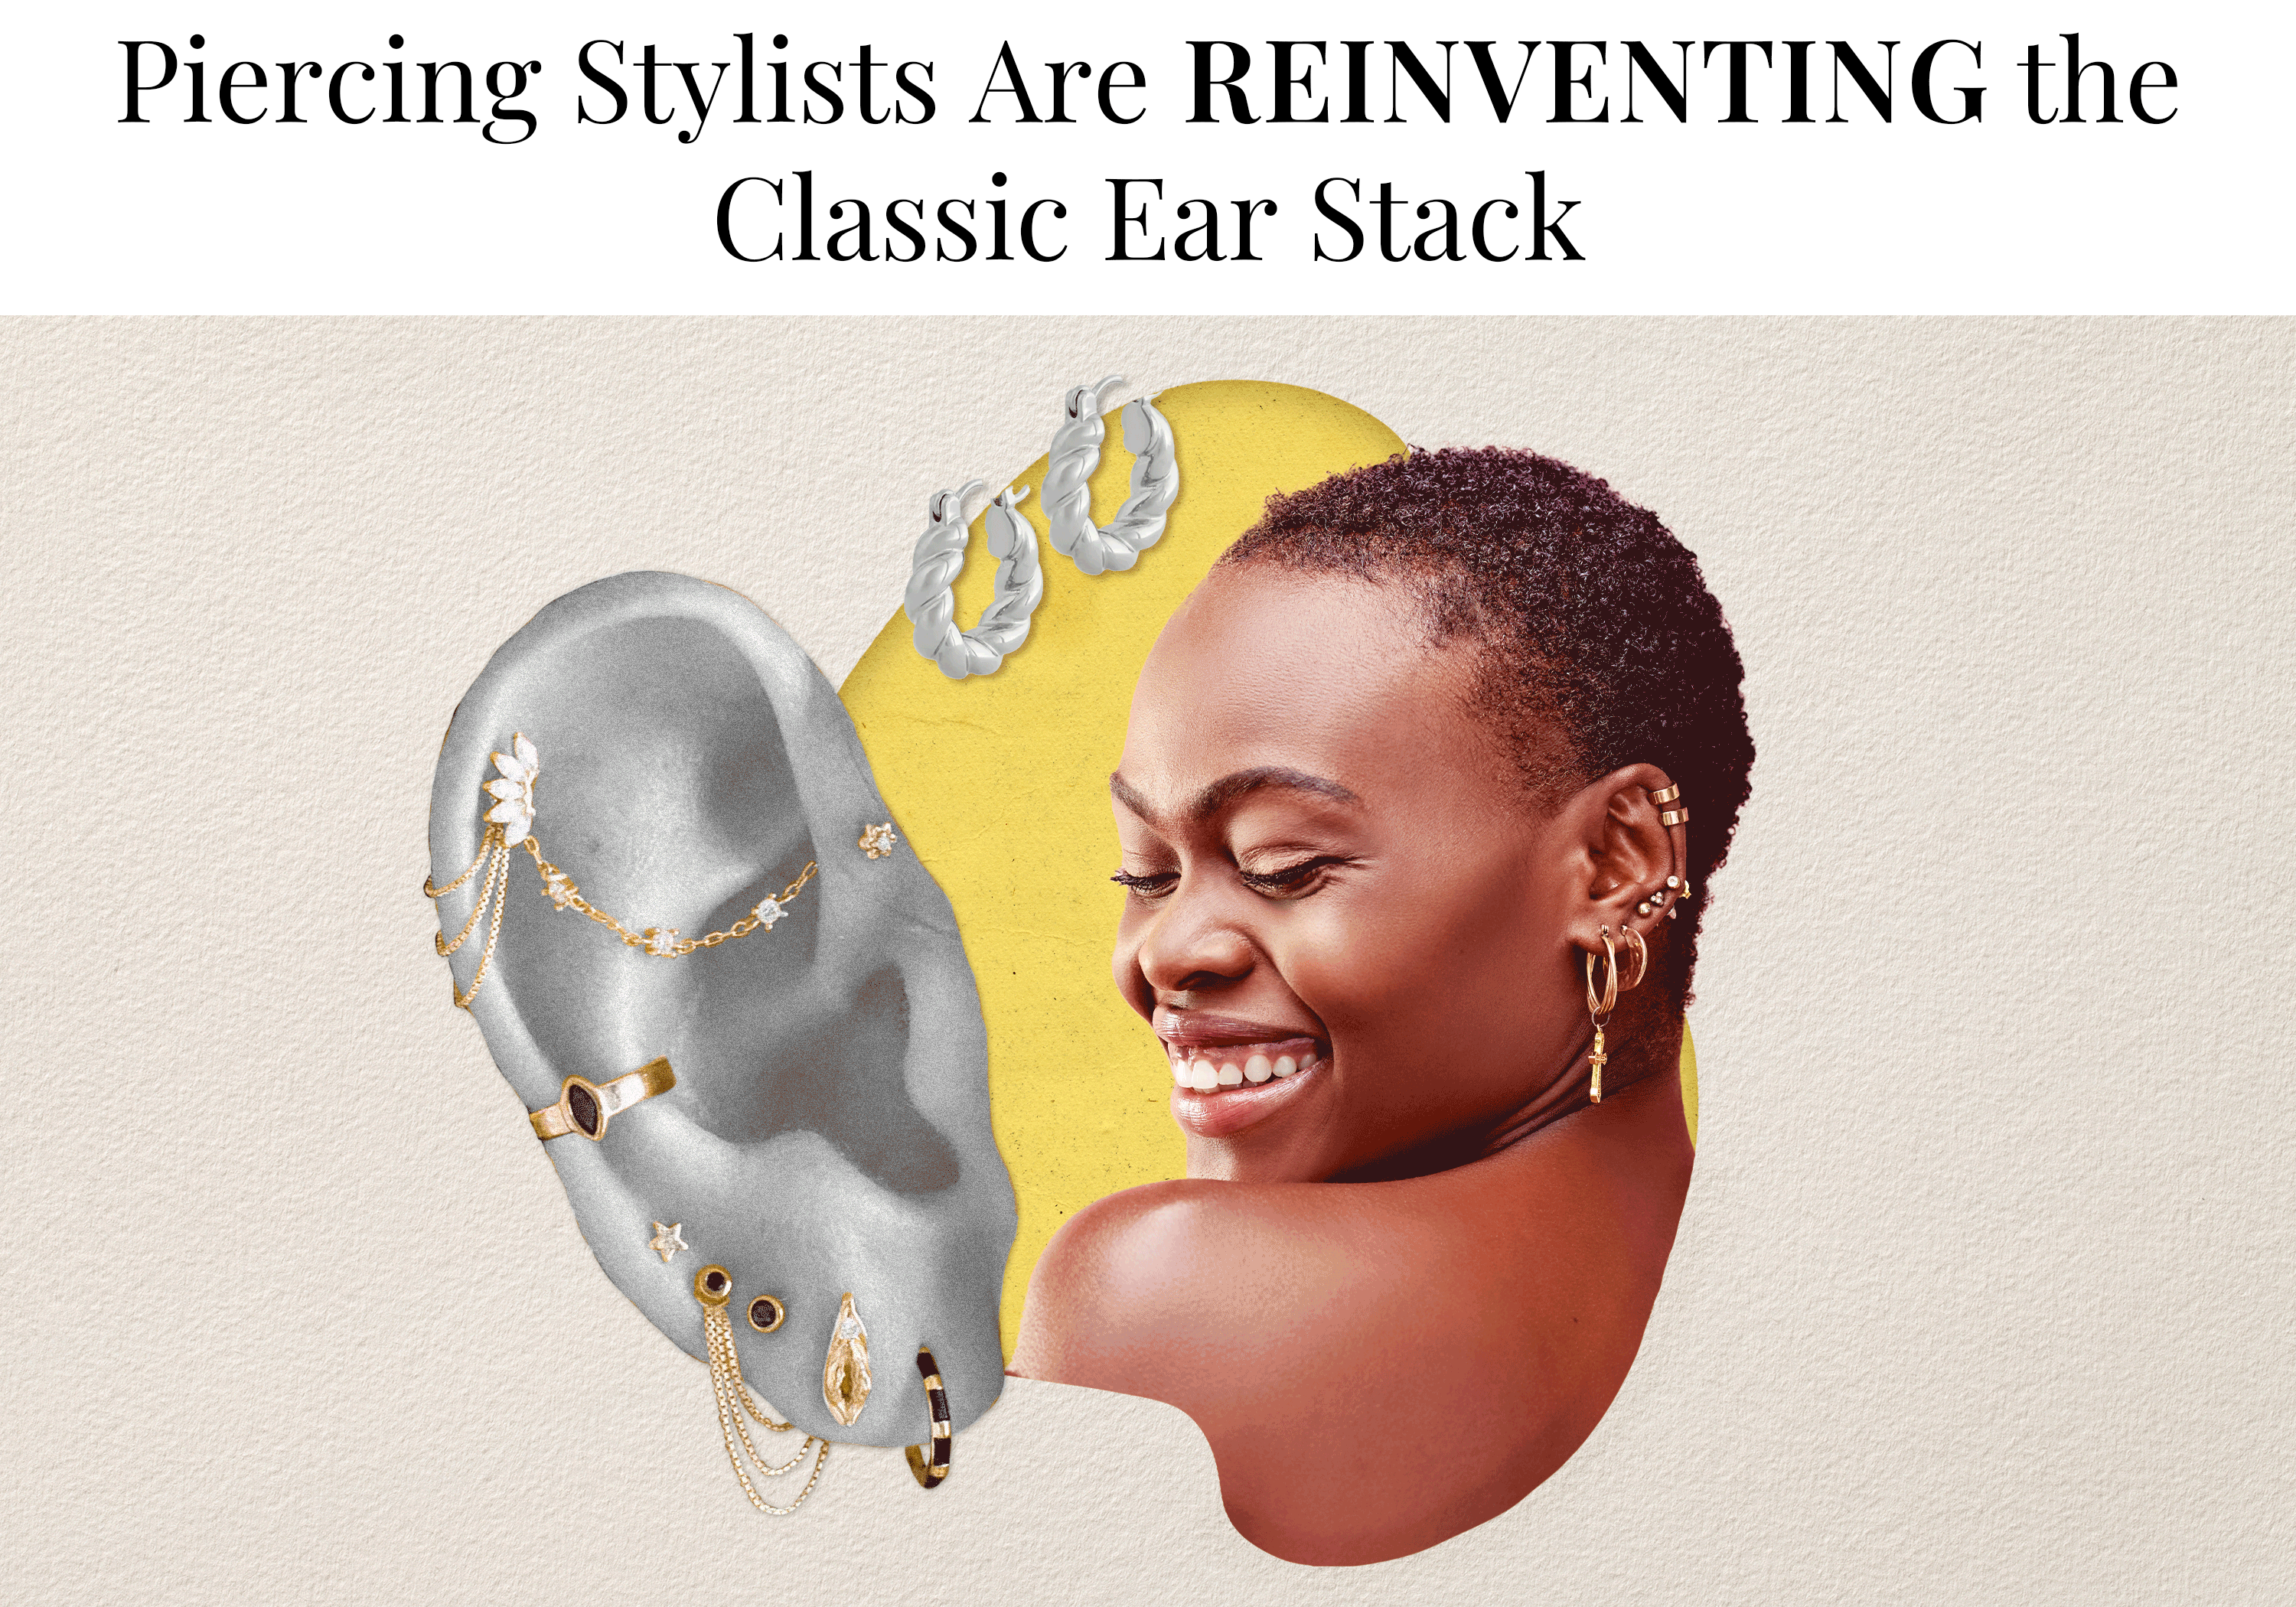 Text: Piercing Stylists Are Reinventing the Classic Ear Stack. Image of a styled ear, multiple earrings, and a woman with many earrings